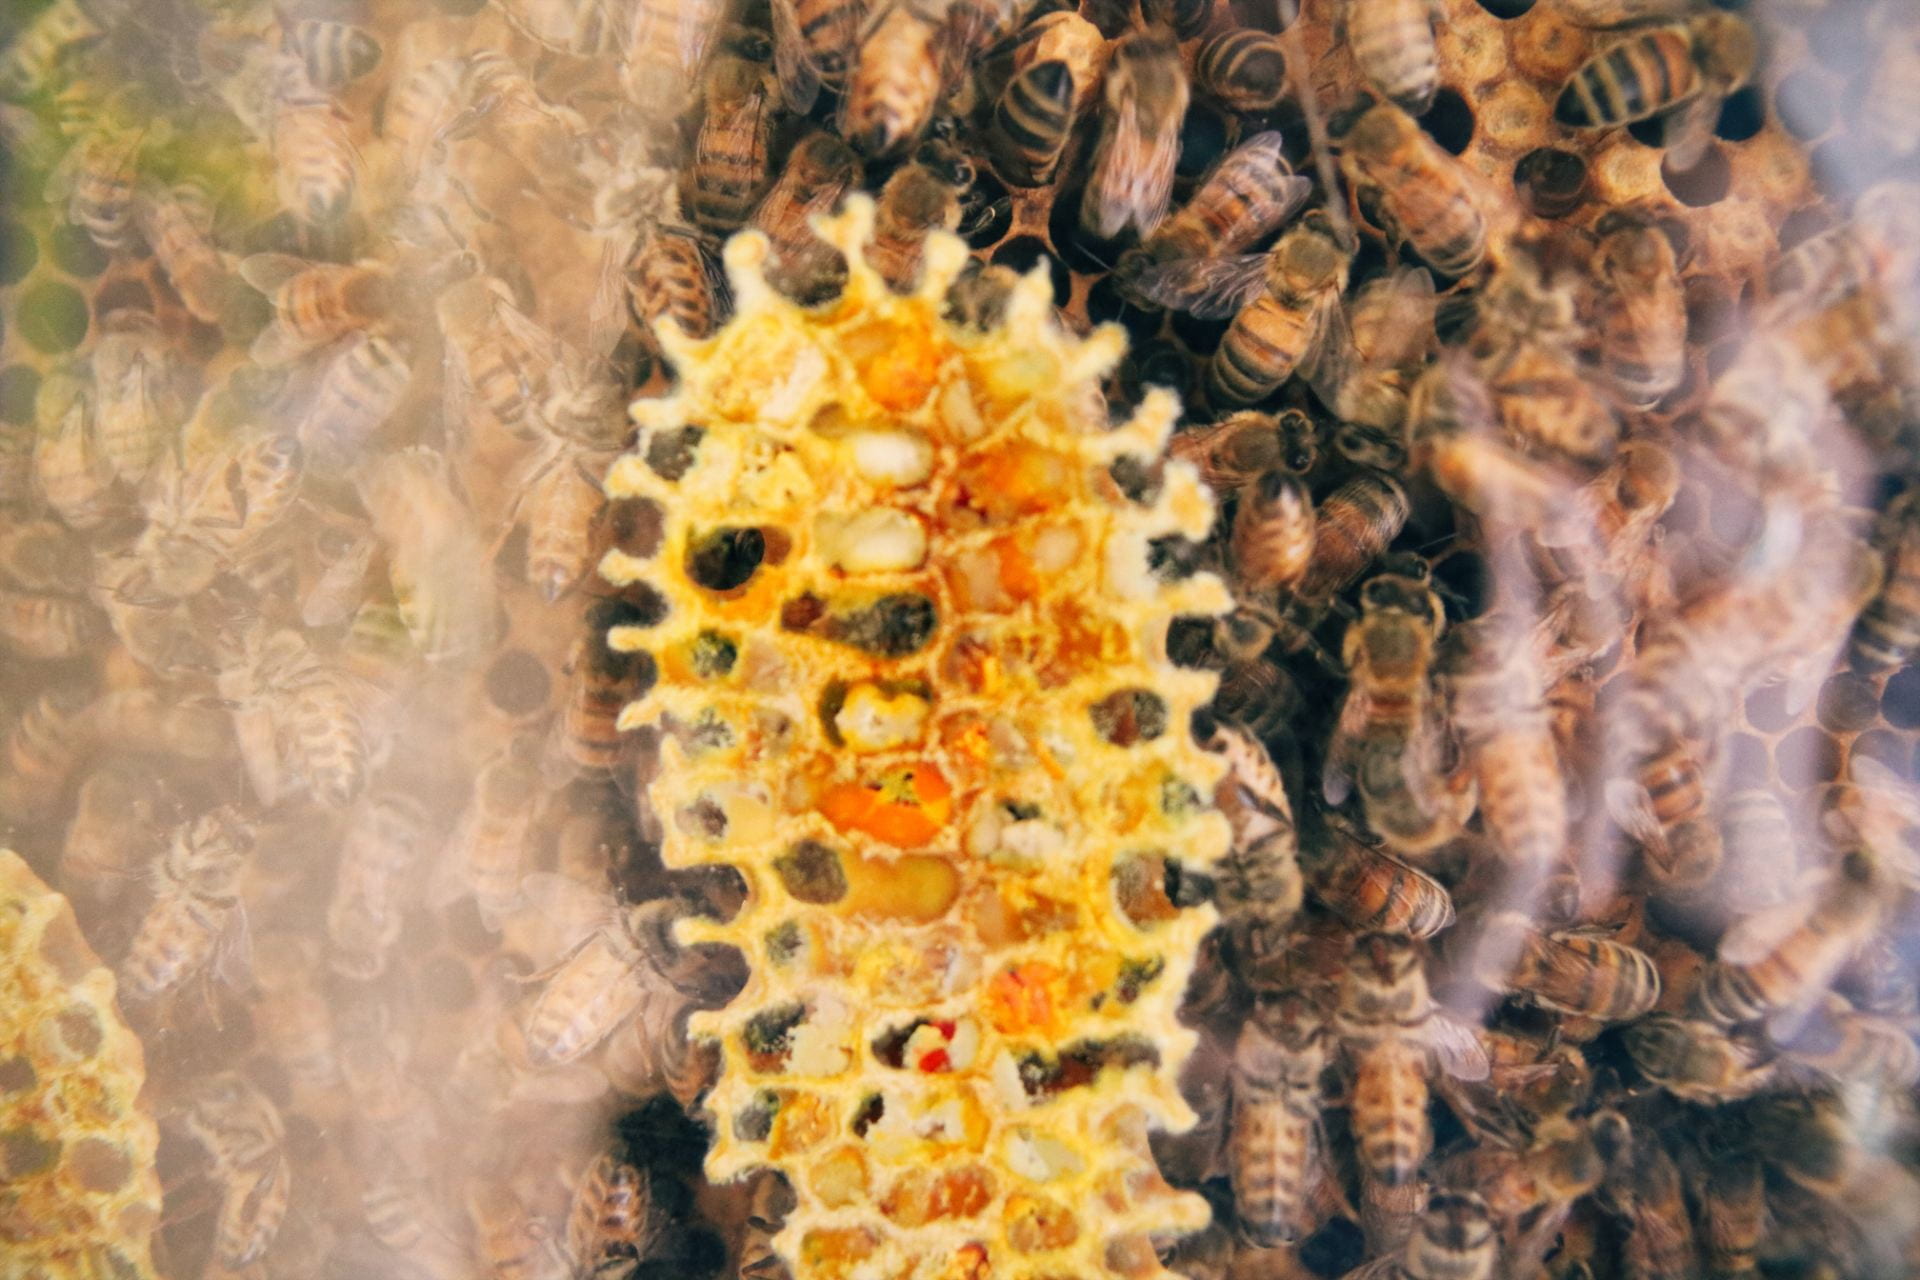 Image of Honeybee larvae and bees surrounding them in the observation hive